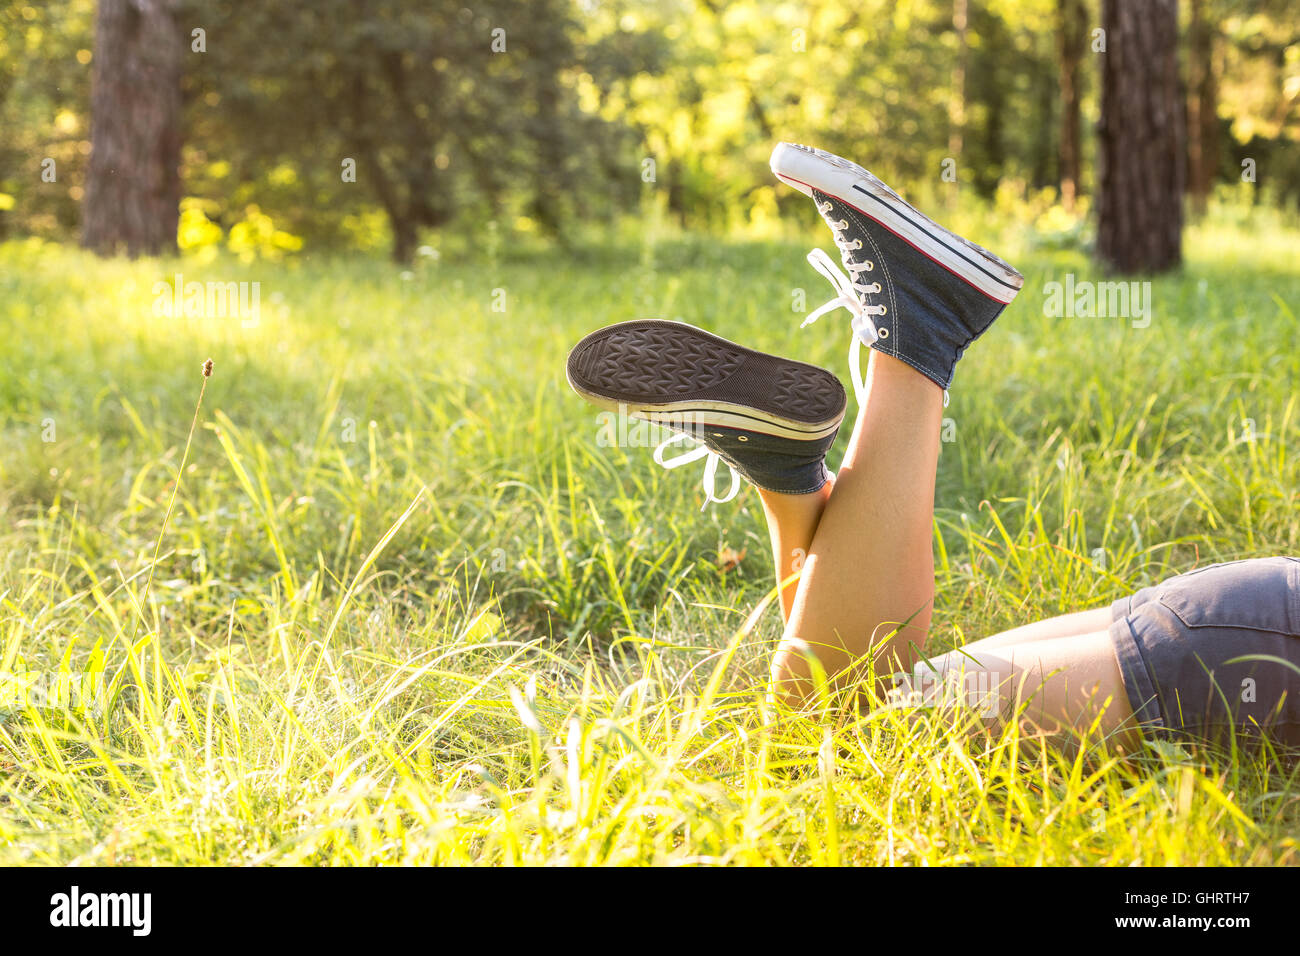 Woman legs wearing jeans sneakers lying on a grass in a forest lawn in the evening Stock Photo